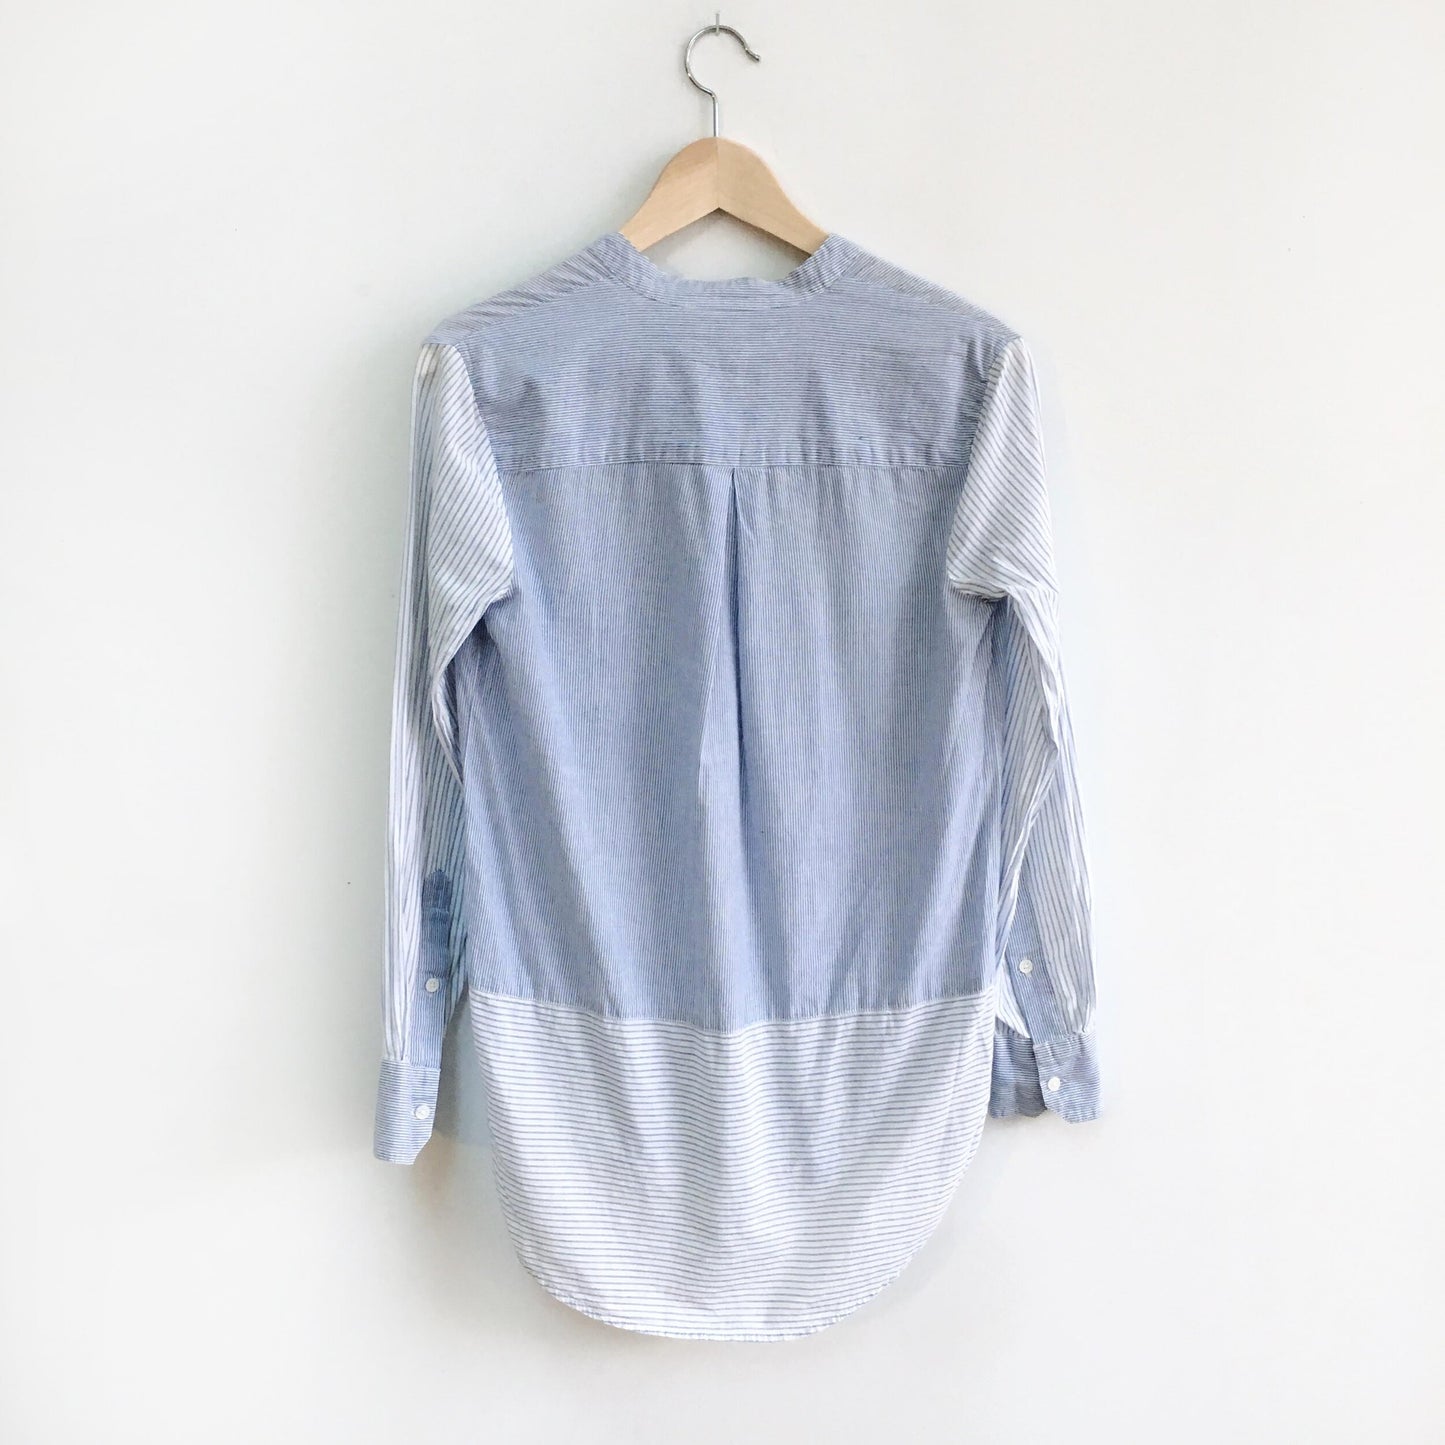 Madewell Wellspring Popover Shirt - size xs